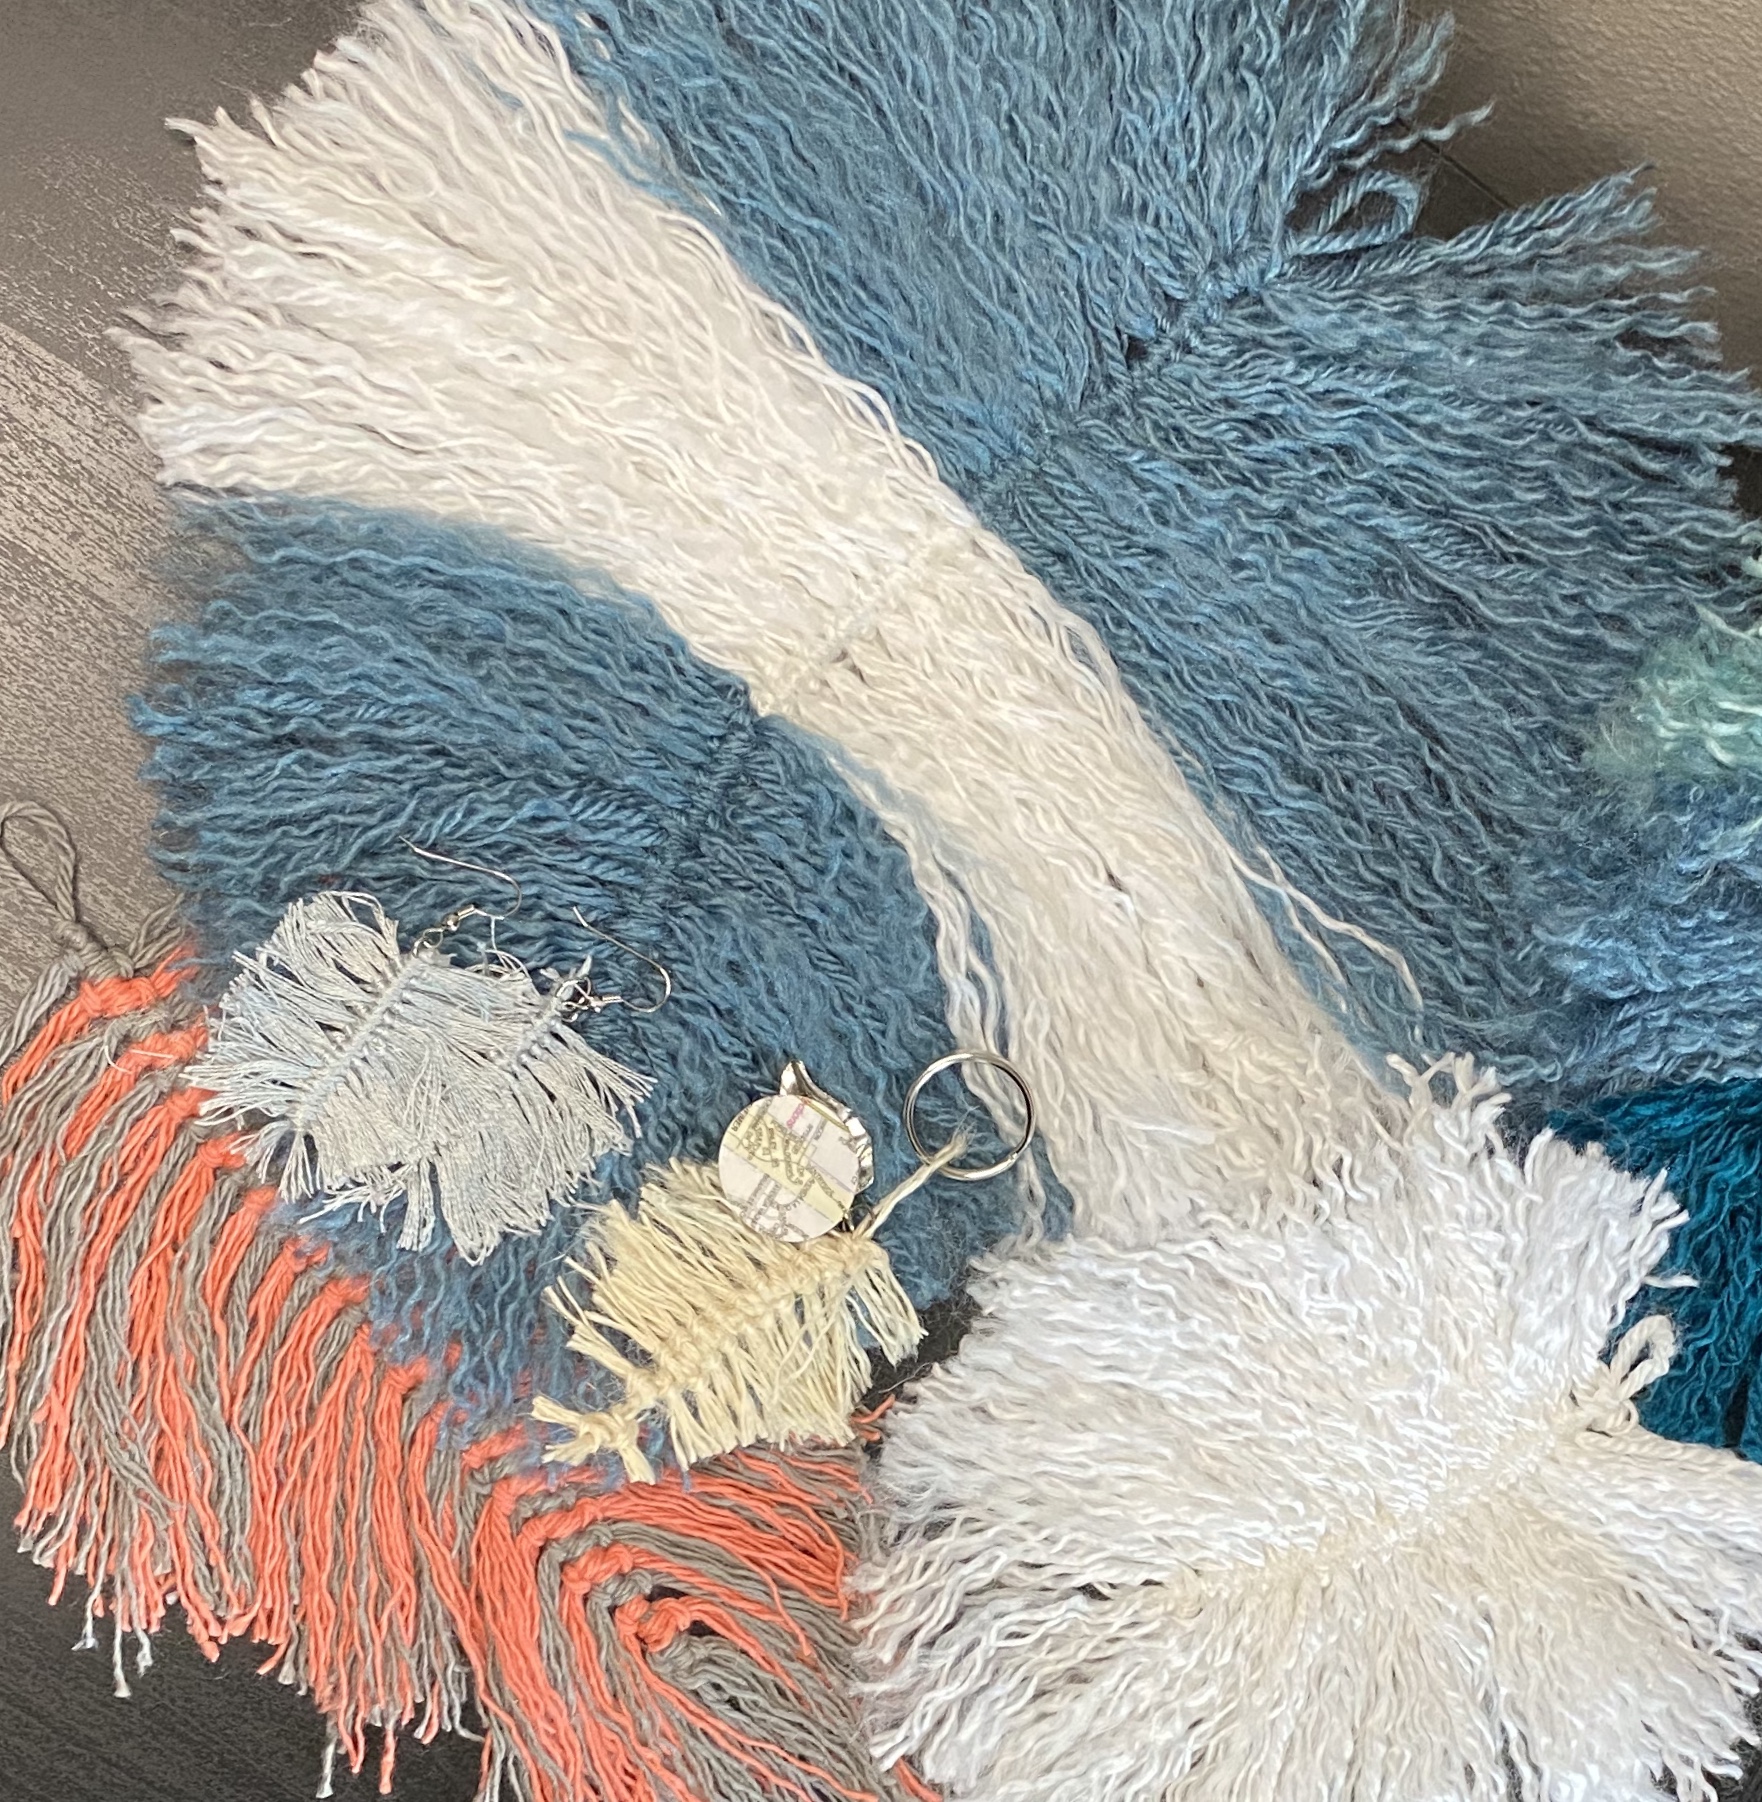 Five sample macrame feather projects using acrylic yarn, emroidery floss, jute, and cotton yarn.